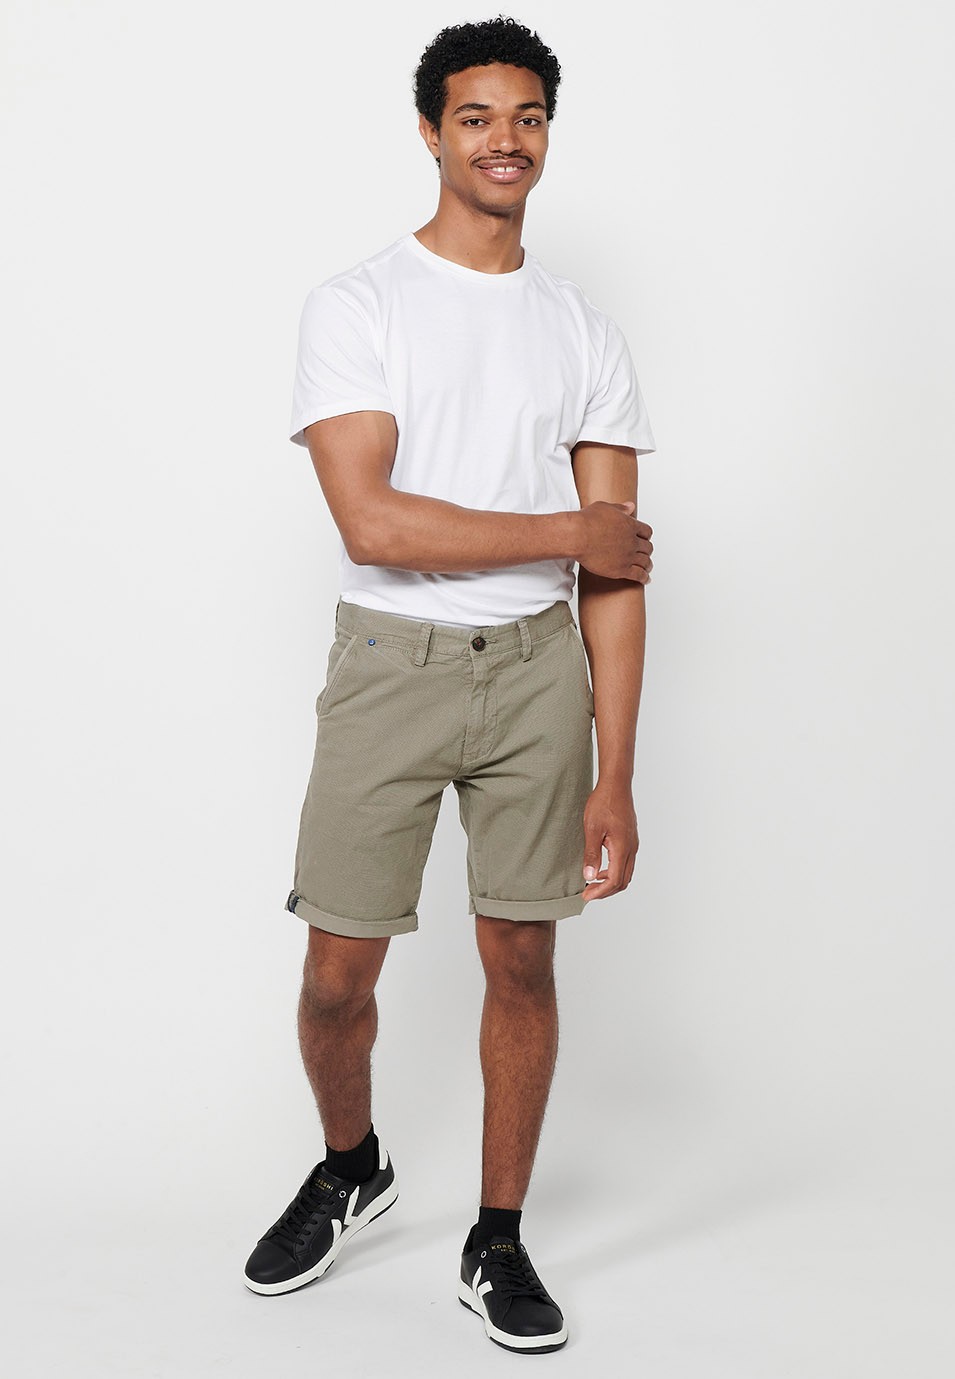 Men's Bermuda Chino Shorts with Turn-Up Finish with Front Zipper and Button Closure with Four Pockets in Mink Color